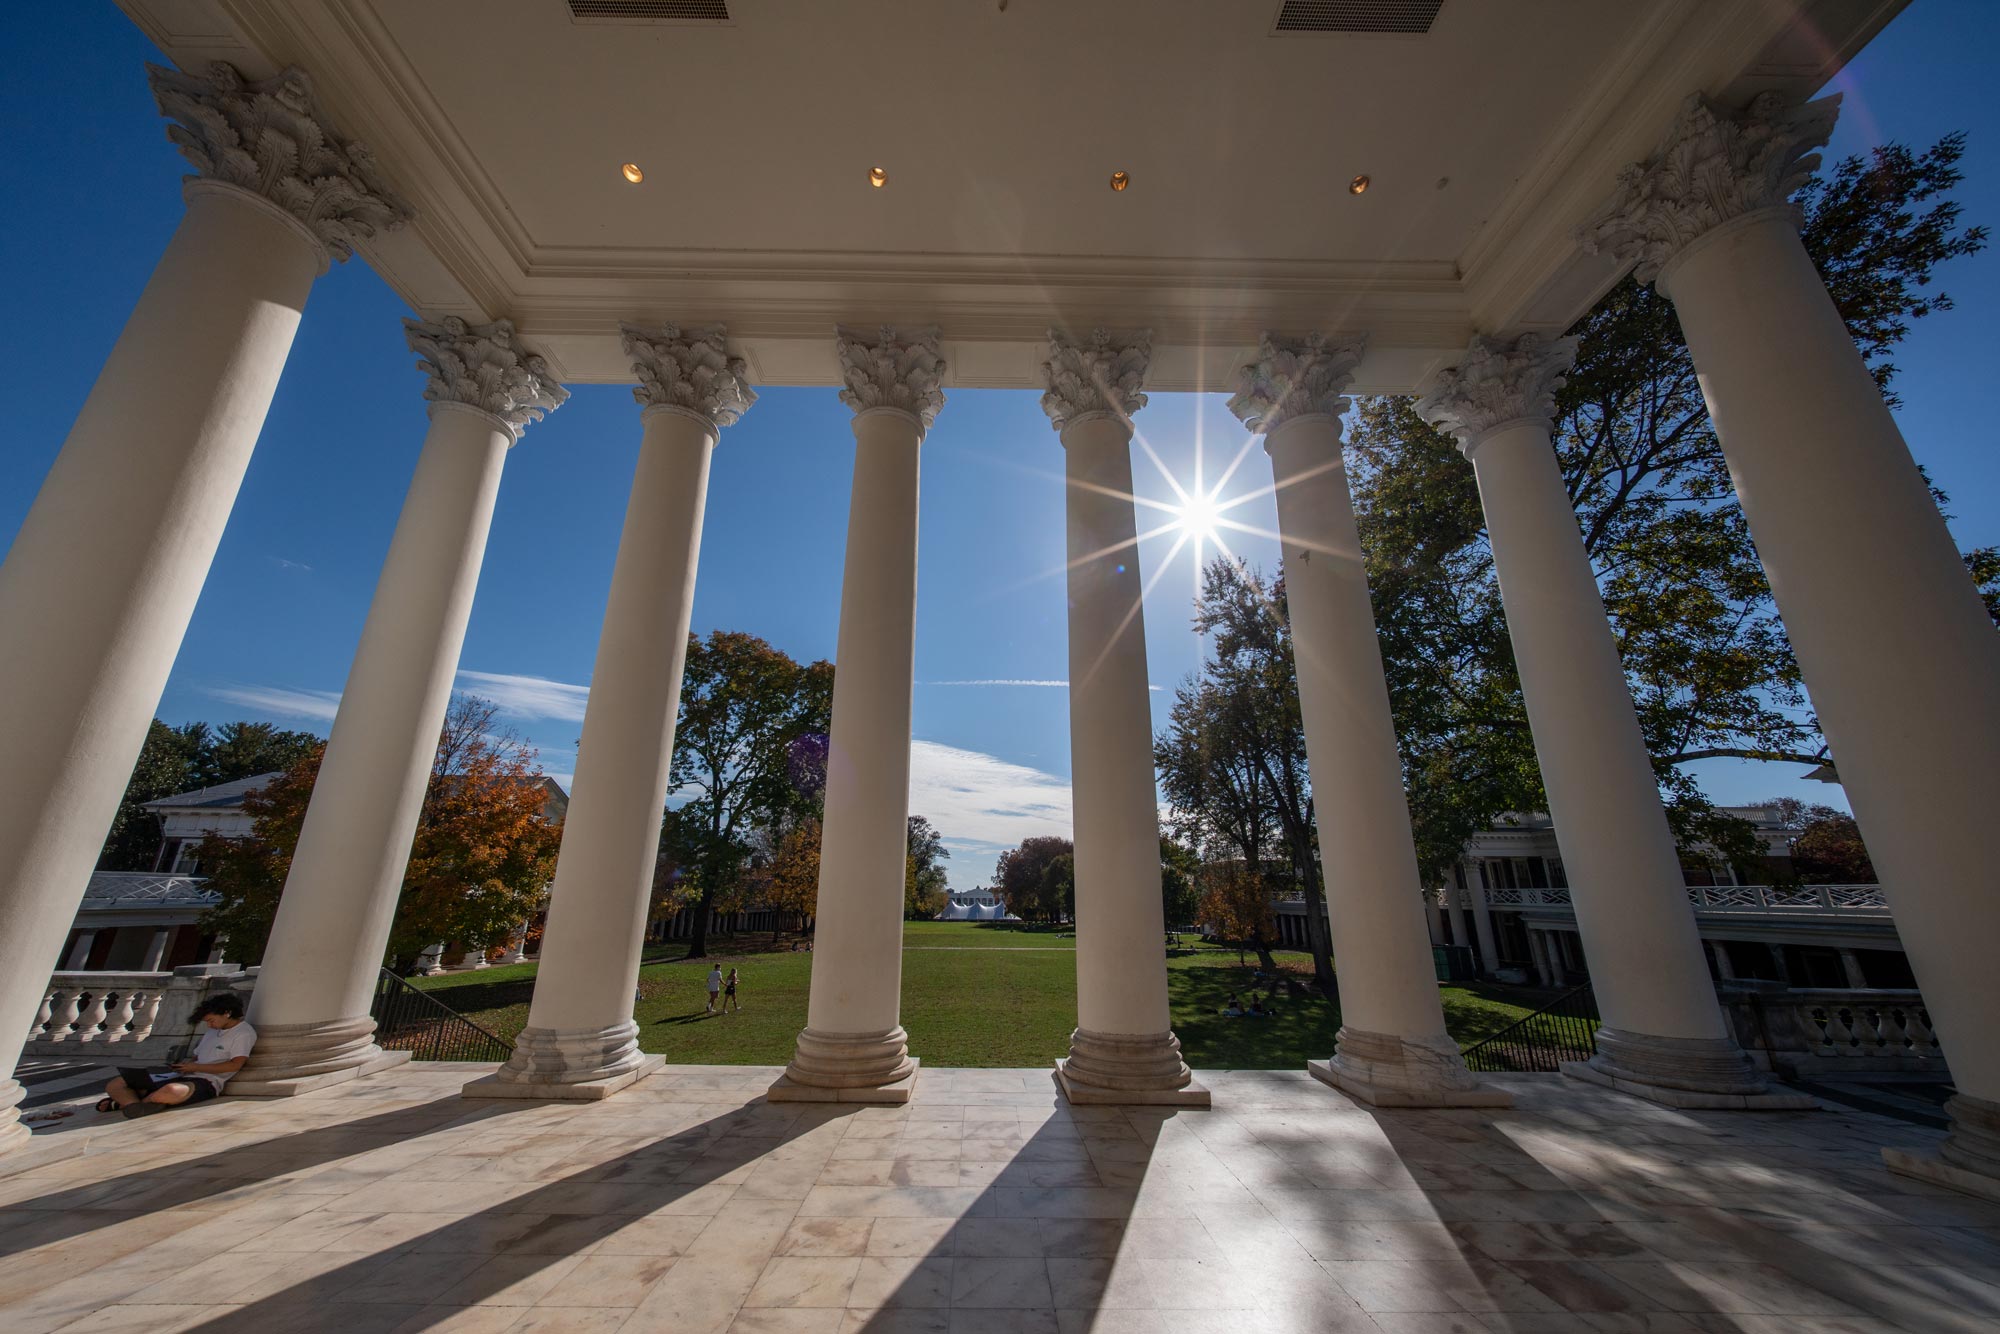 Looking through the columns of the Rotunda out towards the Lawn as the sun sits high in the sky